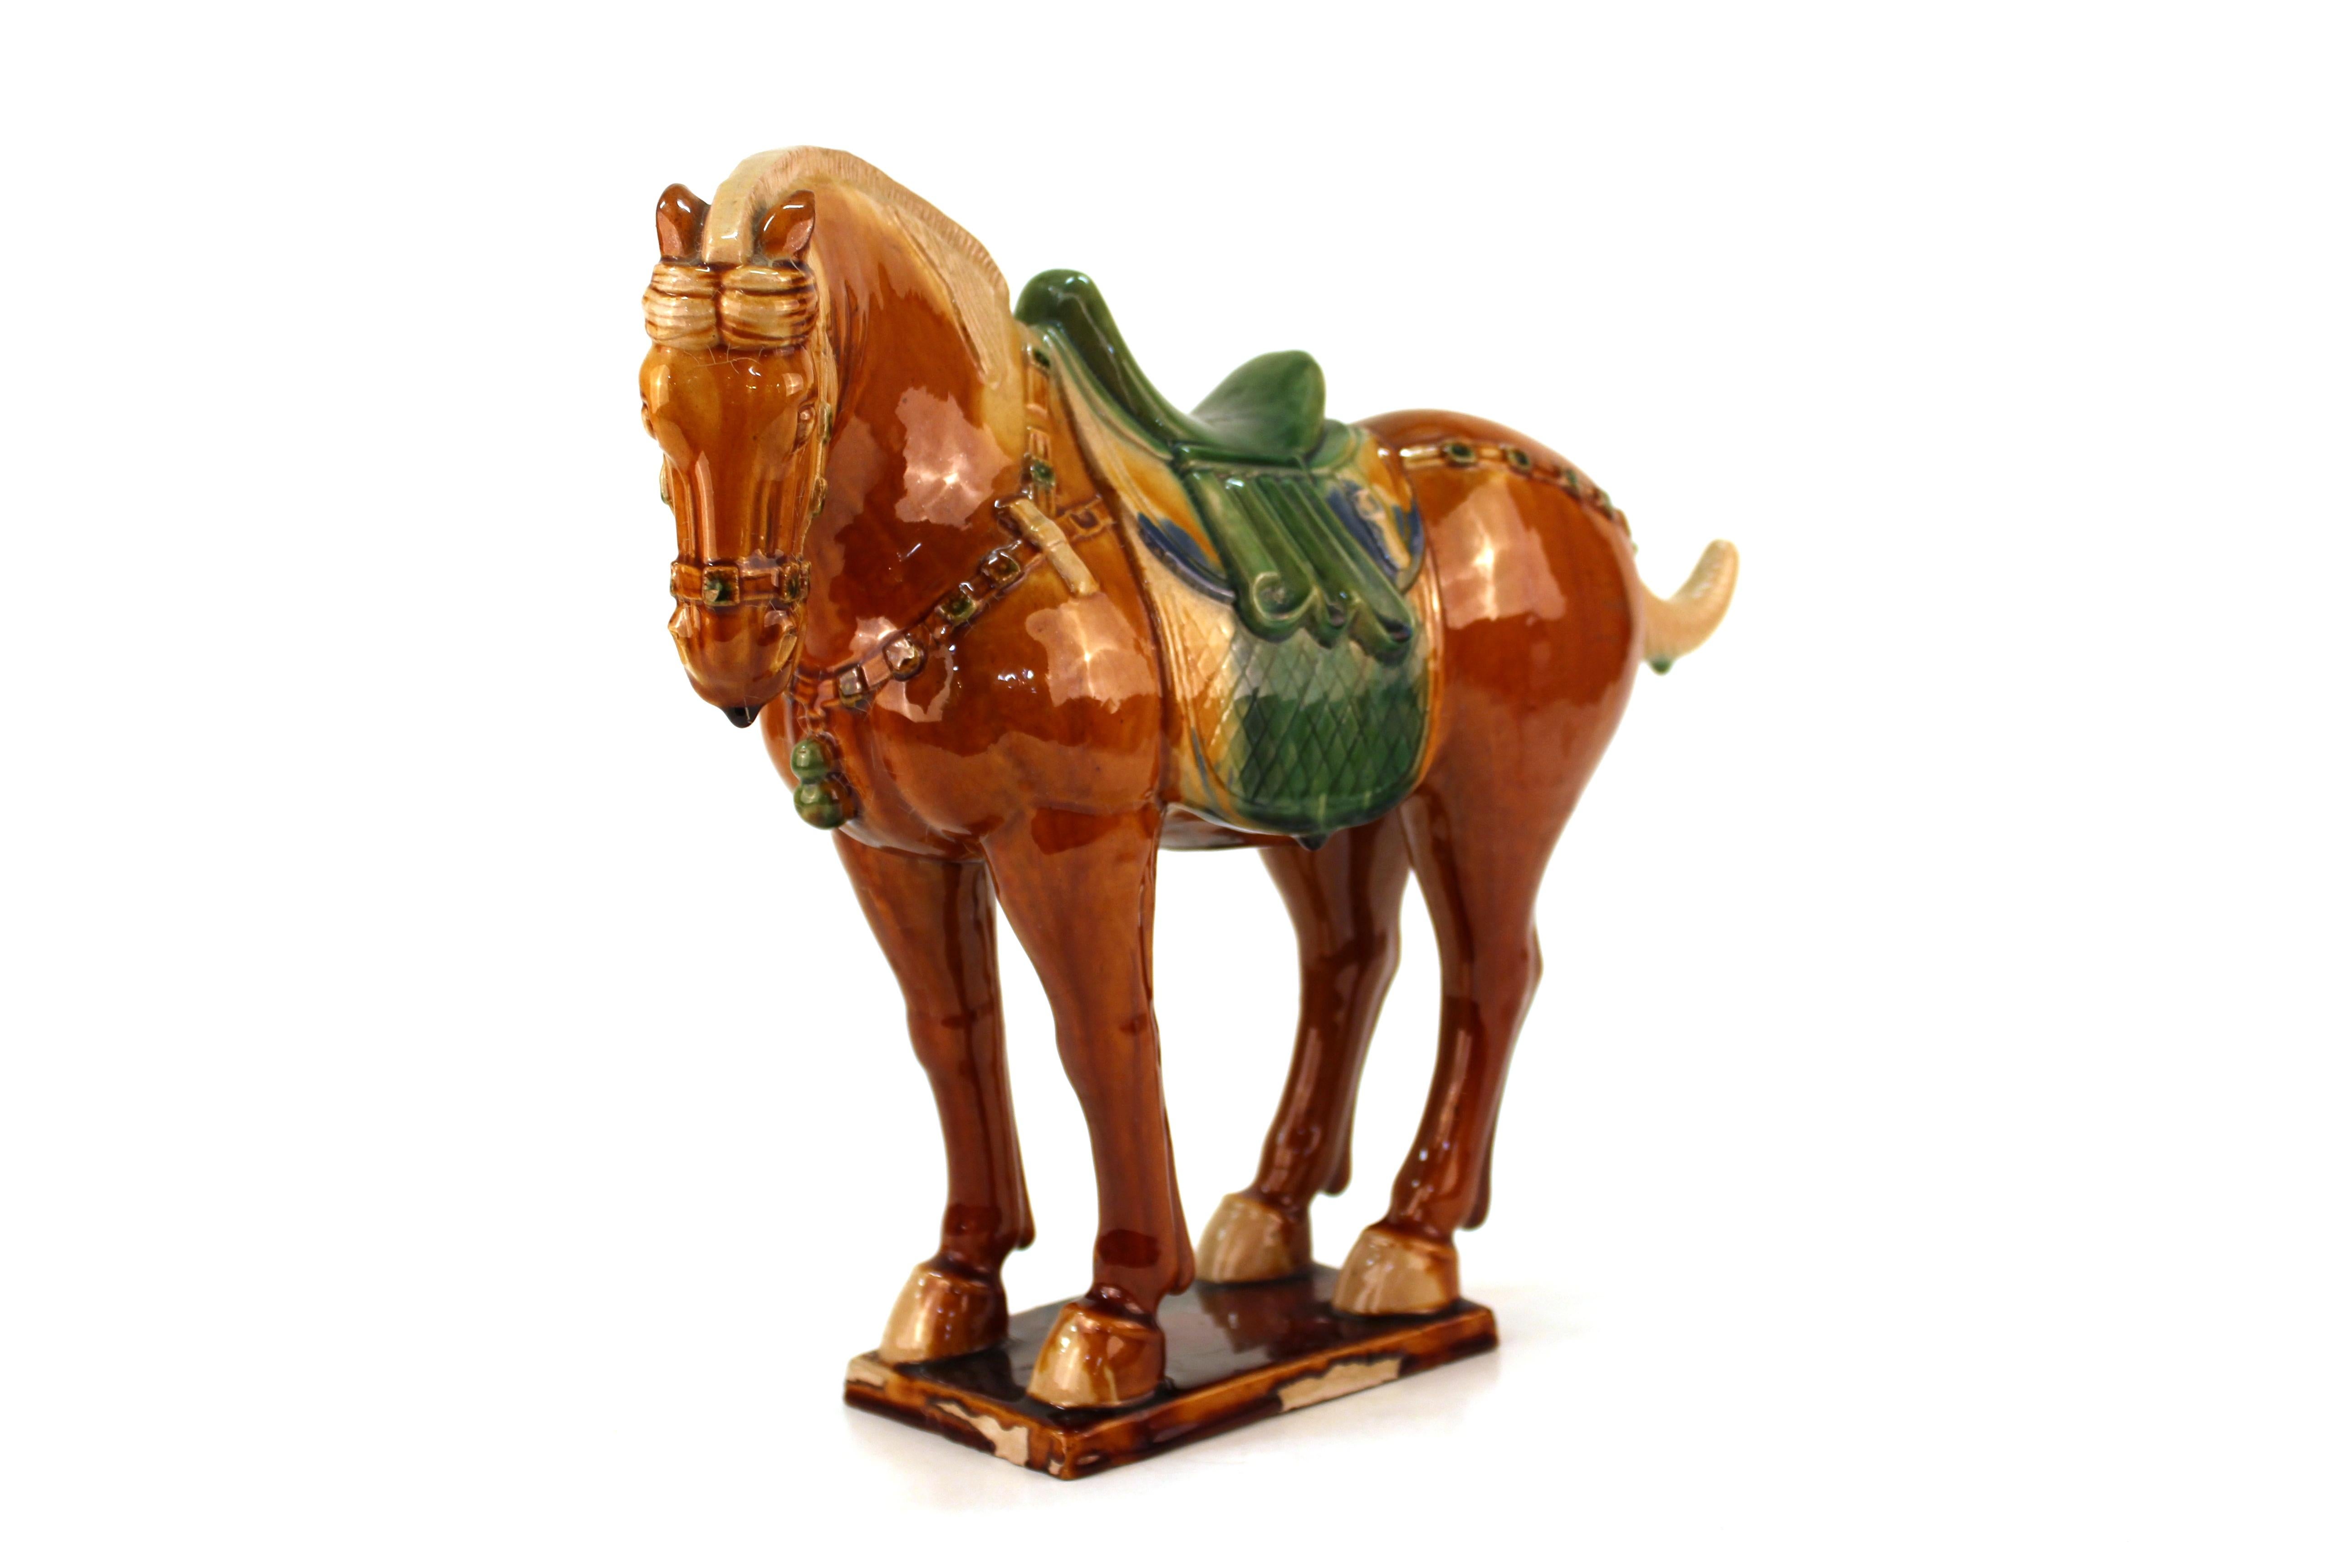 Chinese Tang manner Sancai-glazed pottery statue of a horse standing on all four legs atop a rectangular base, its head slightly turned to the side. Glaze drips to tip of nose and lower lip and tail. Slight firing imperfection to the mane.